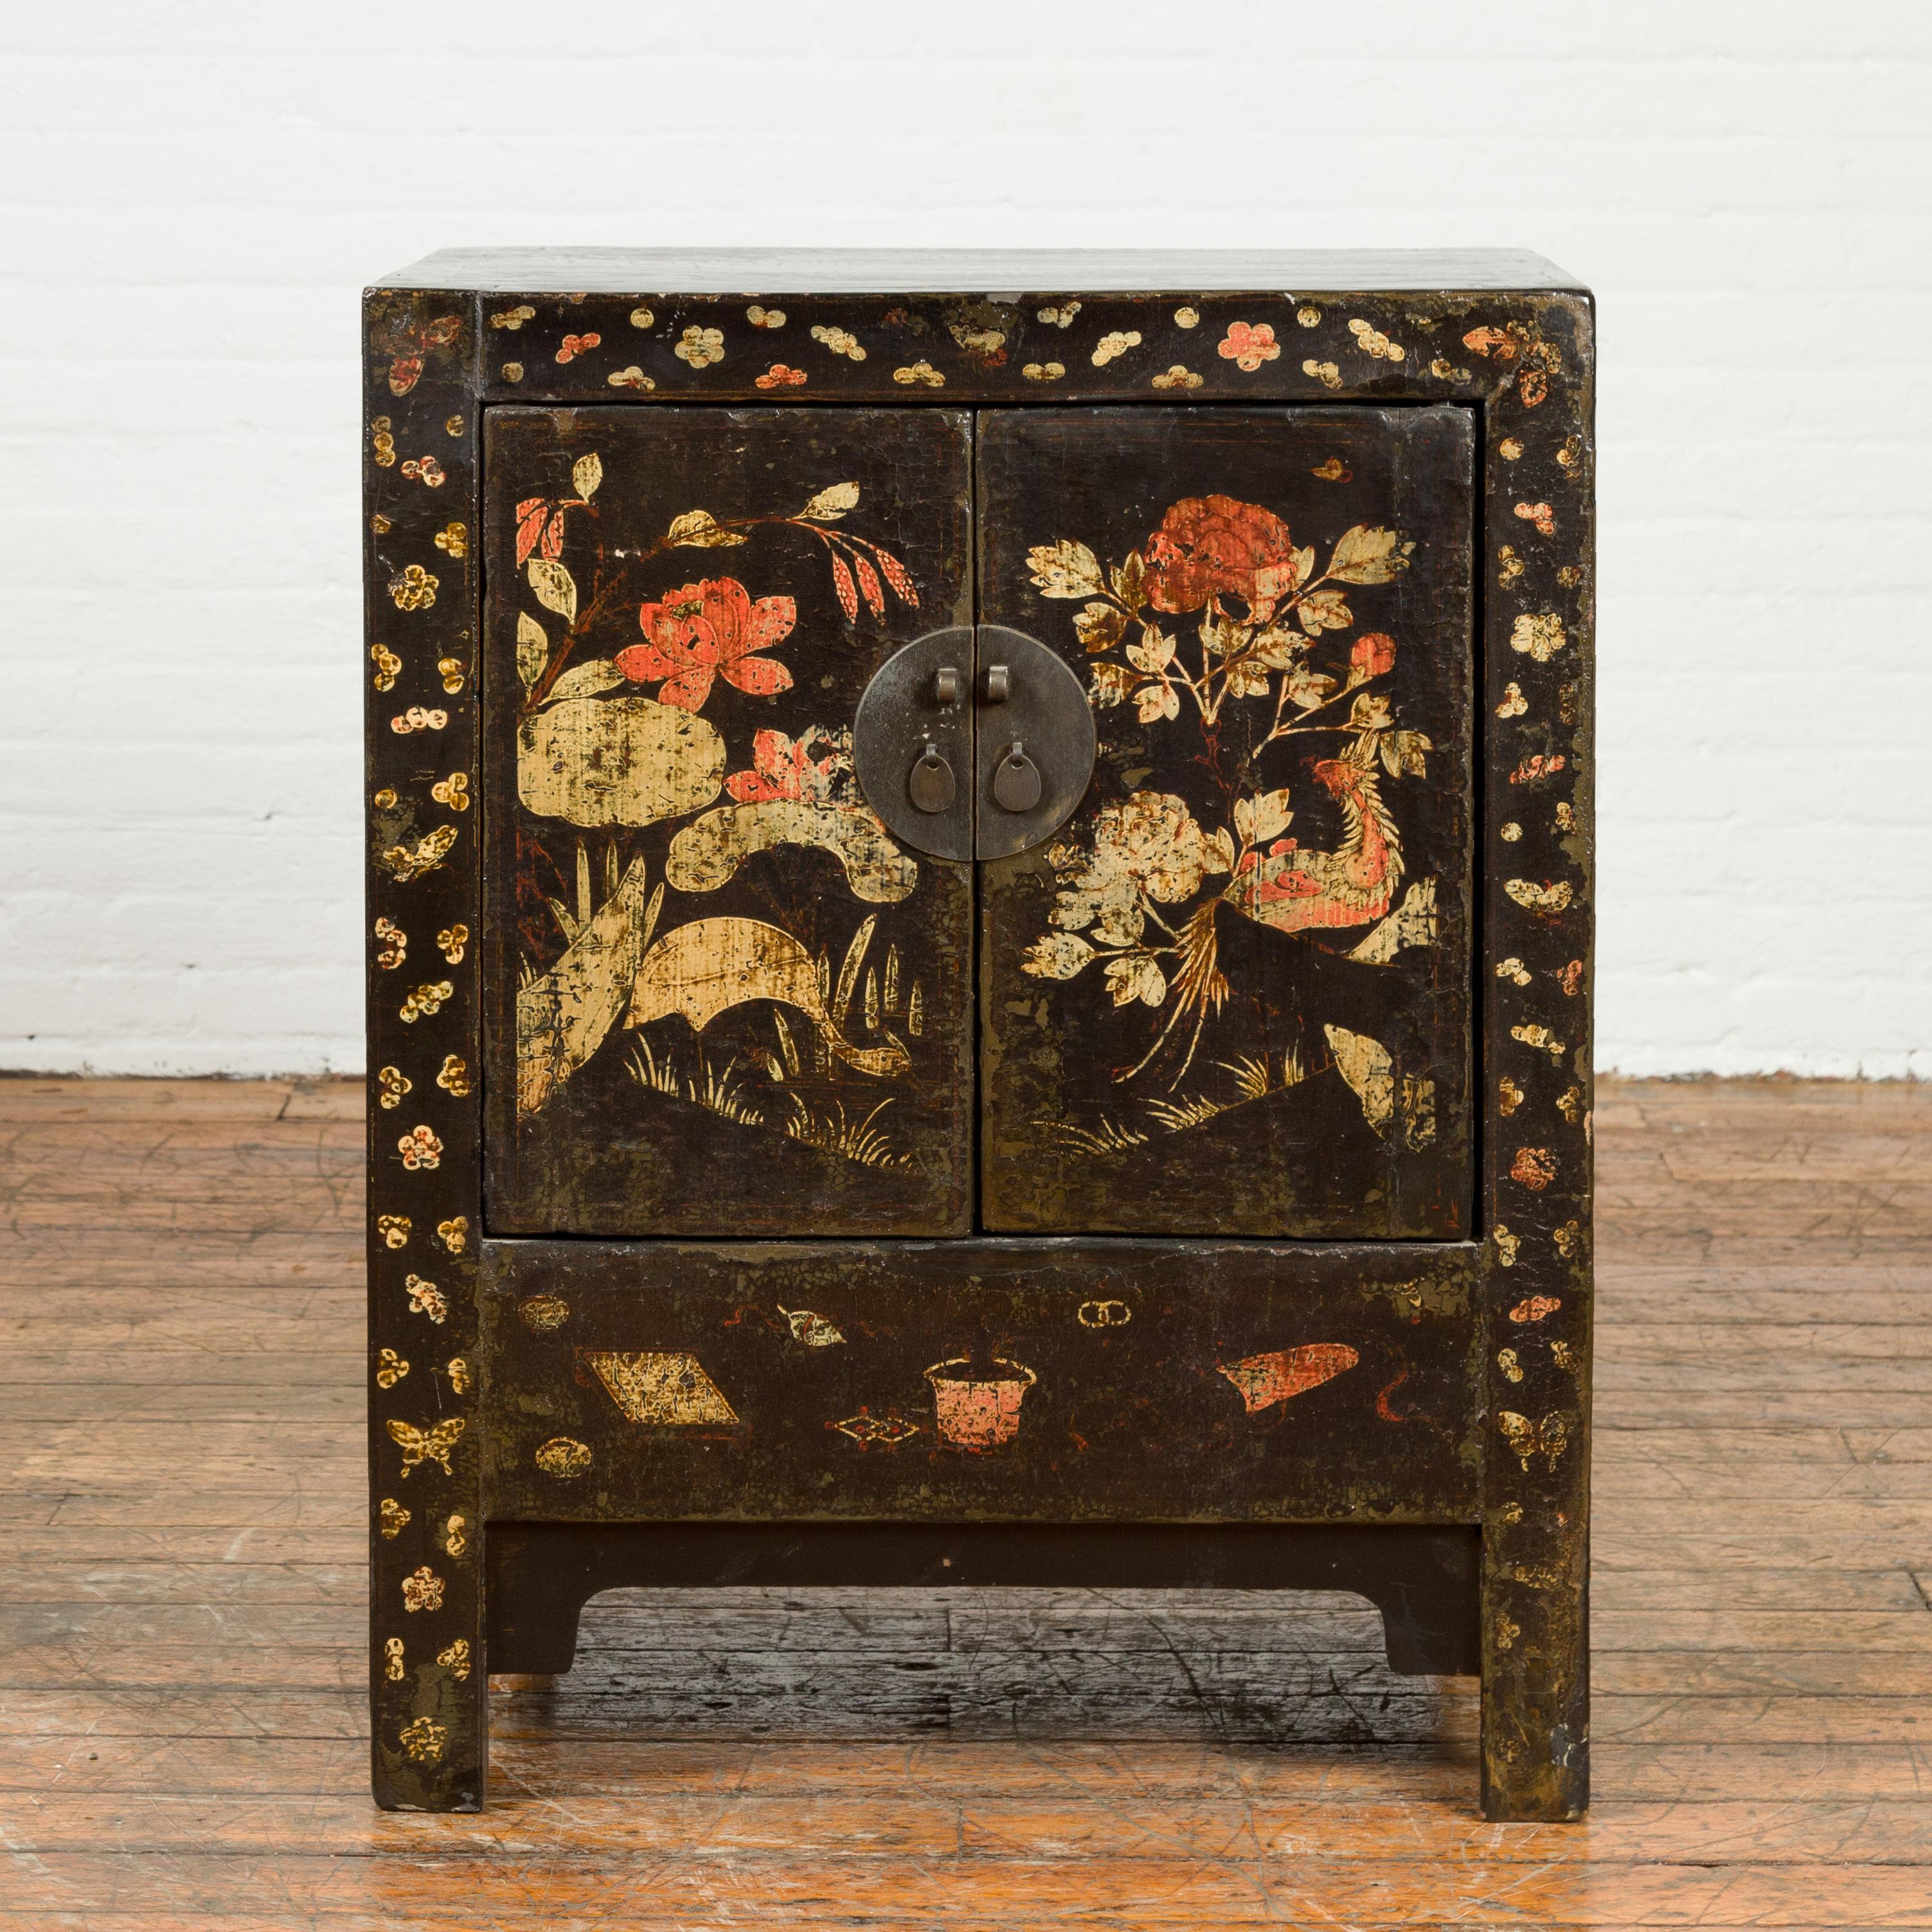 A Chinese Qing Dynasty period side cabinet from the 19th century, with original décor. Created in China during the Qing Dynasty, this side cabinet features a rectangular top sitting above a façade showcasing its original décor standing out